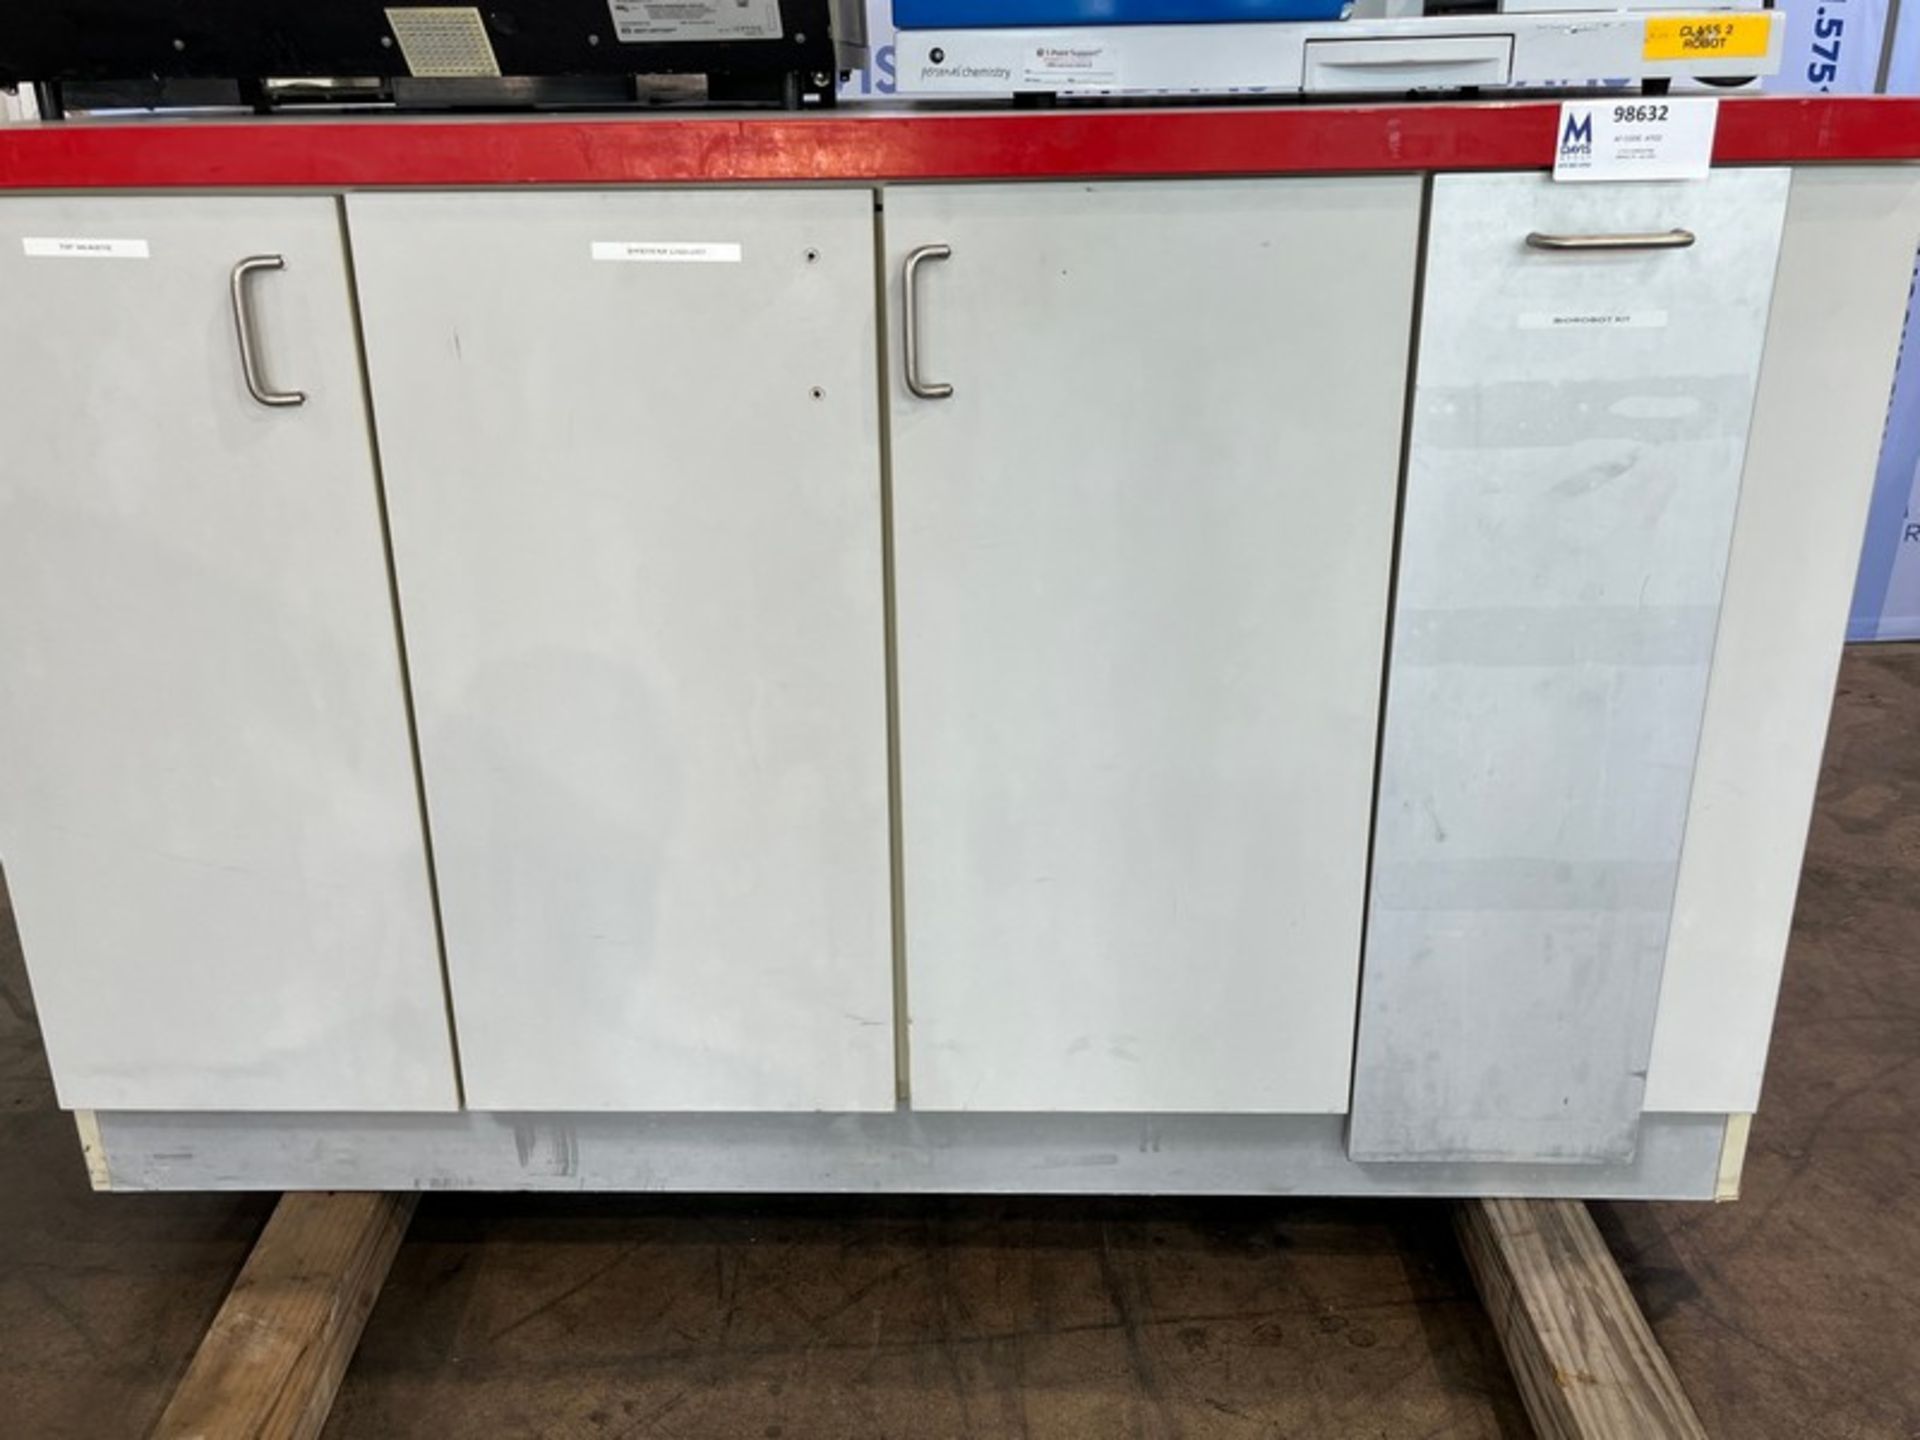 Acid Resistant Lab Cabinet, Acid Resistant Lab Cabinet (INV#98632) (Located @ the MDG Auction